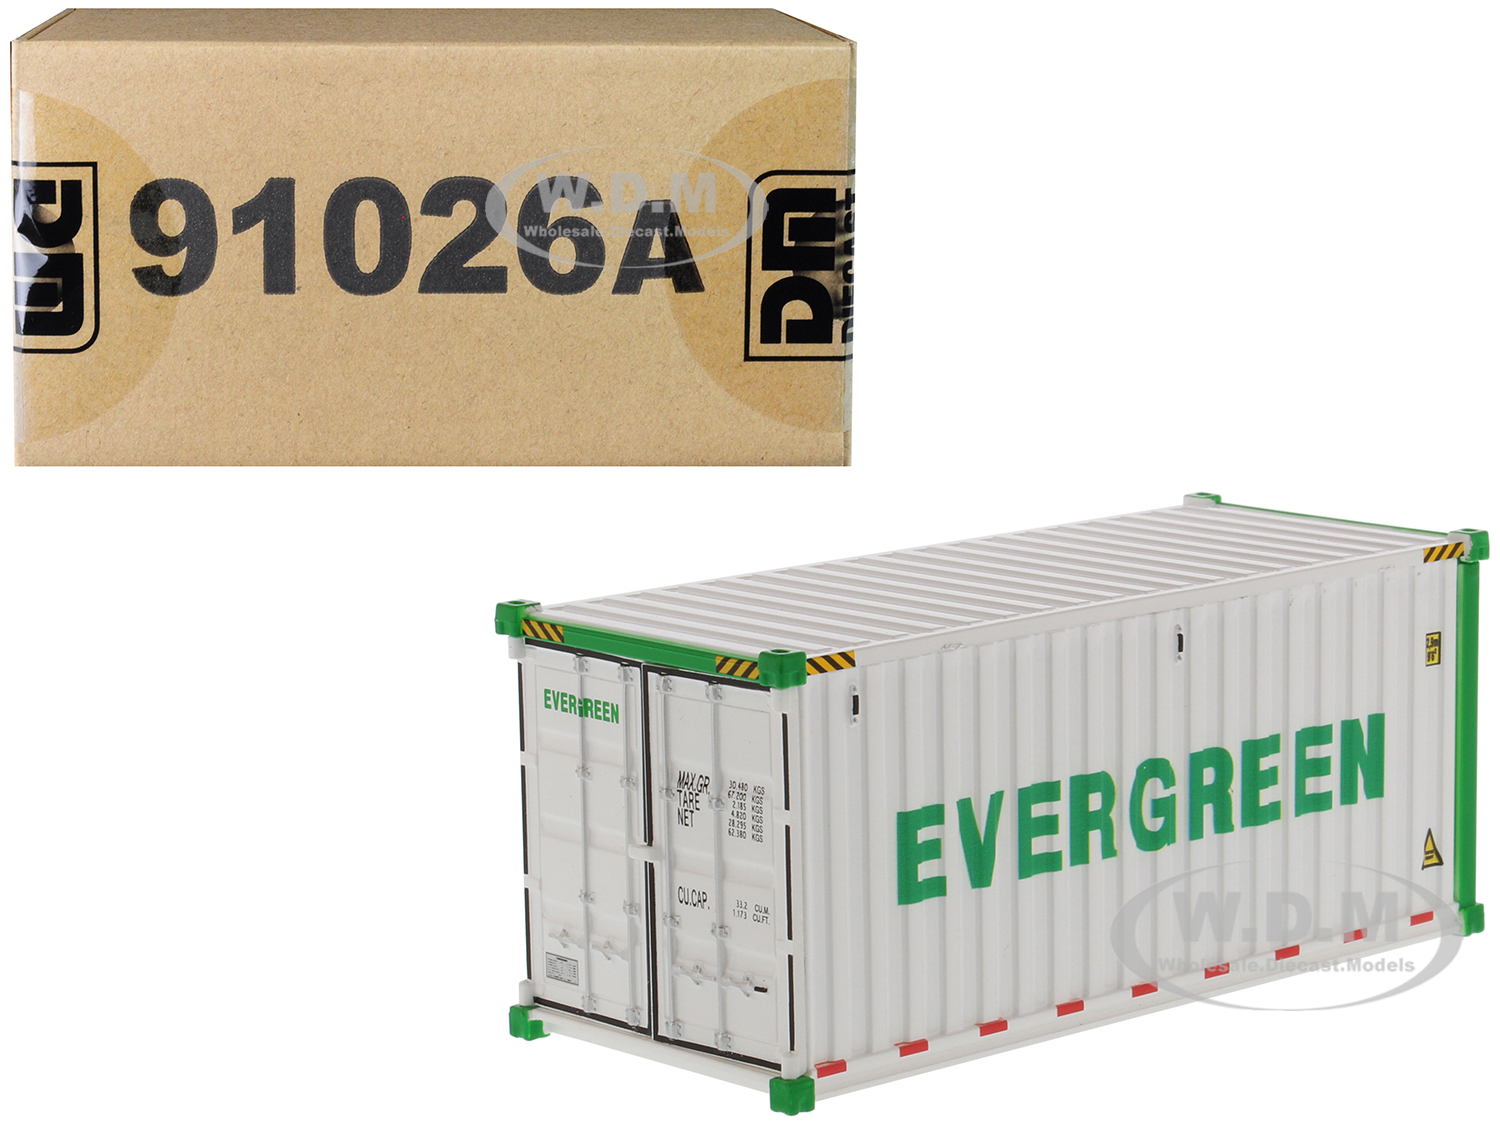 20 Refrigerated Sea Container "EverGreen" White "Transport Series" 1/50 Model by Diecast Masters